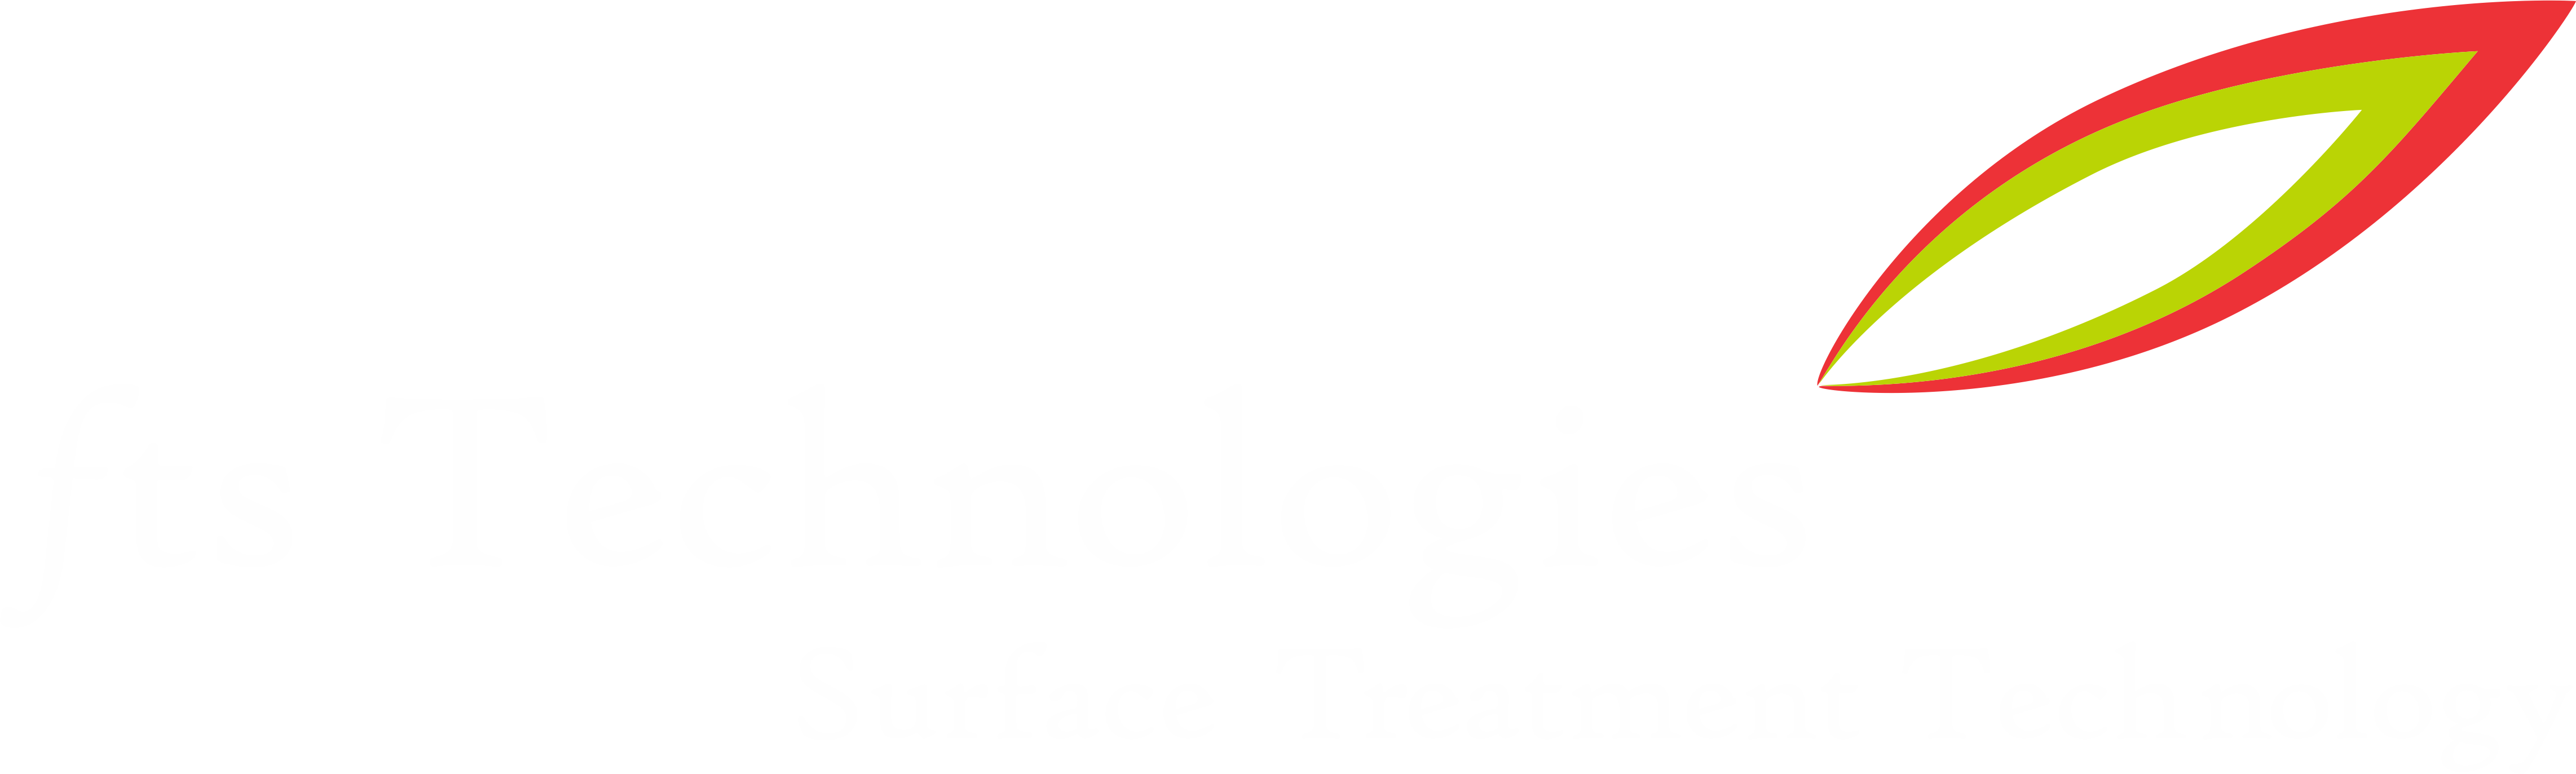 Flame Surface Treatment Technology